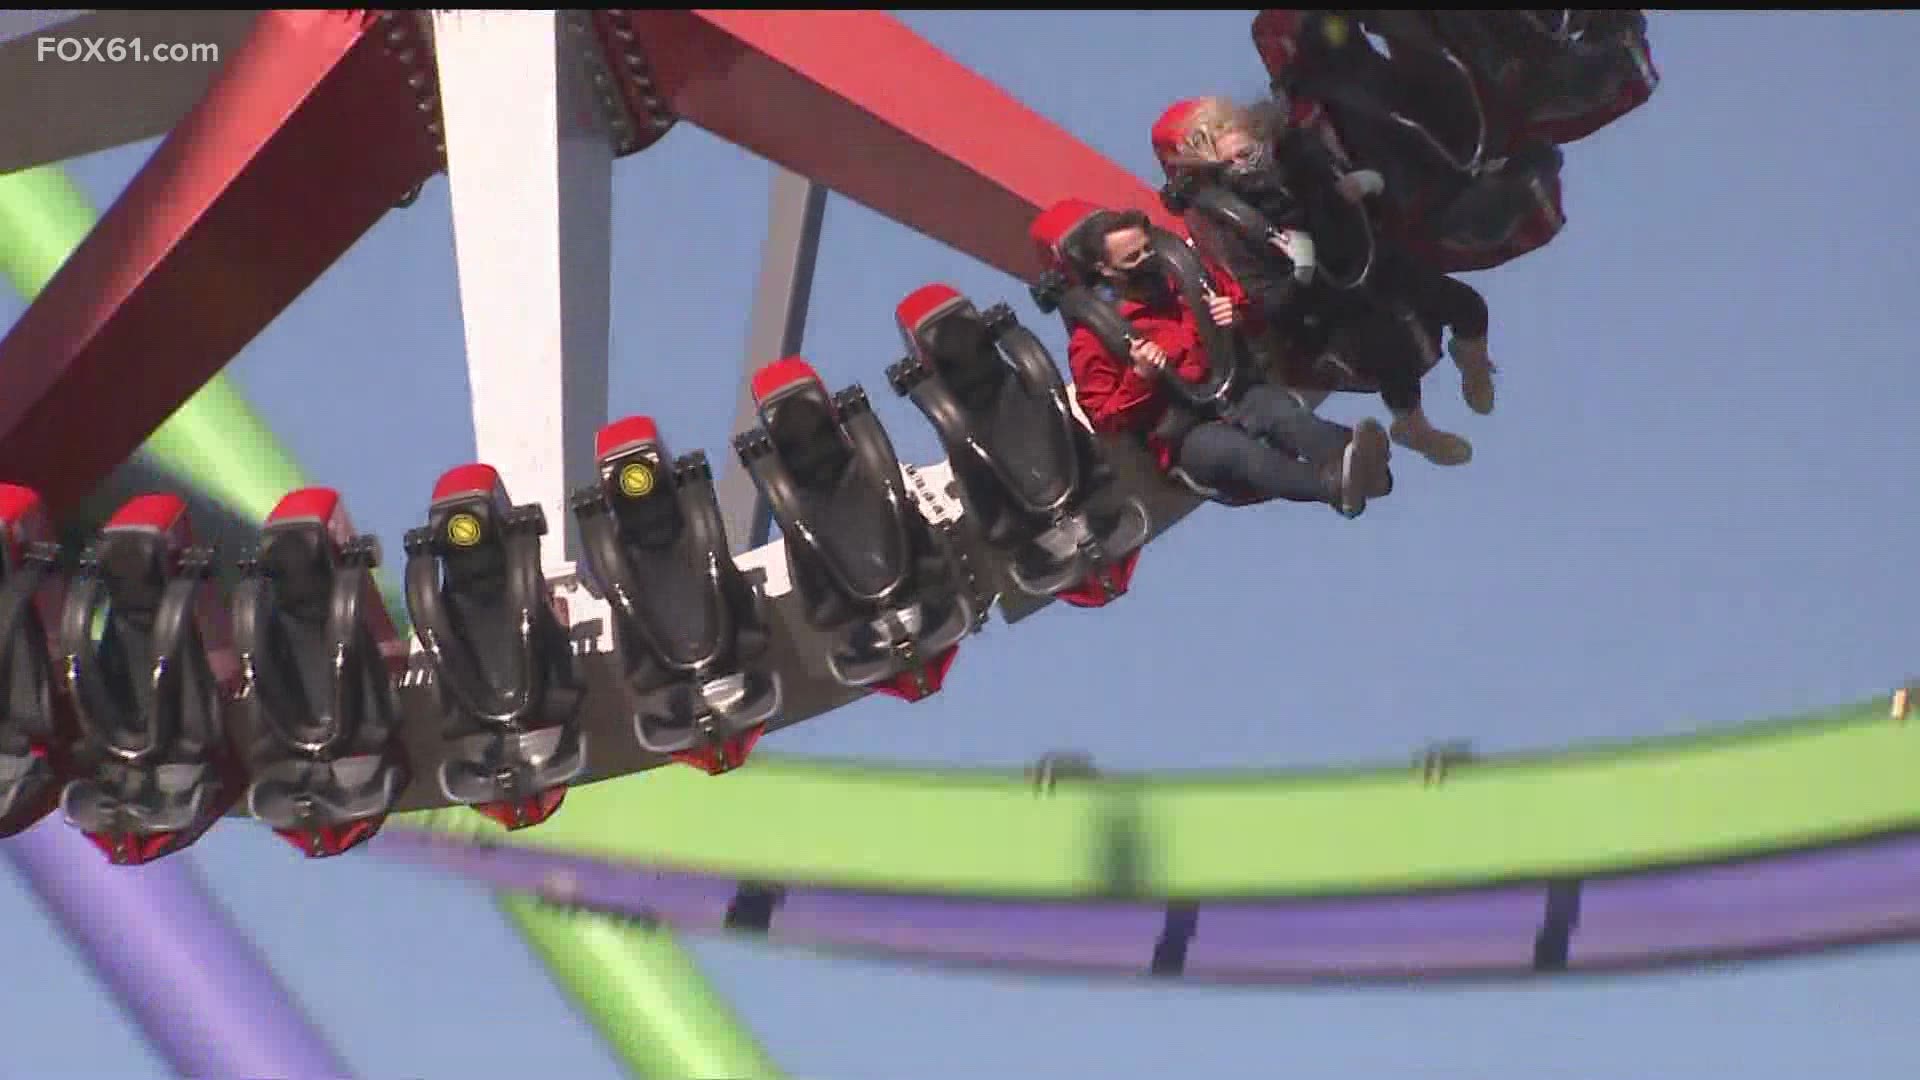 What a way to spend the morning! The theme park opens to the general public on Saturday, May 15.